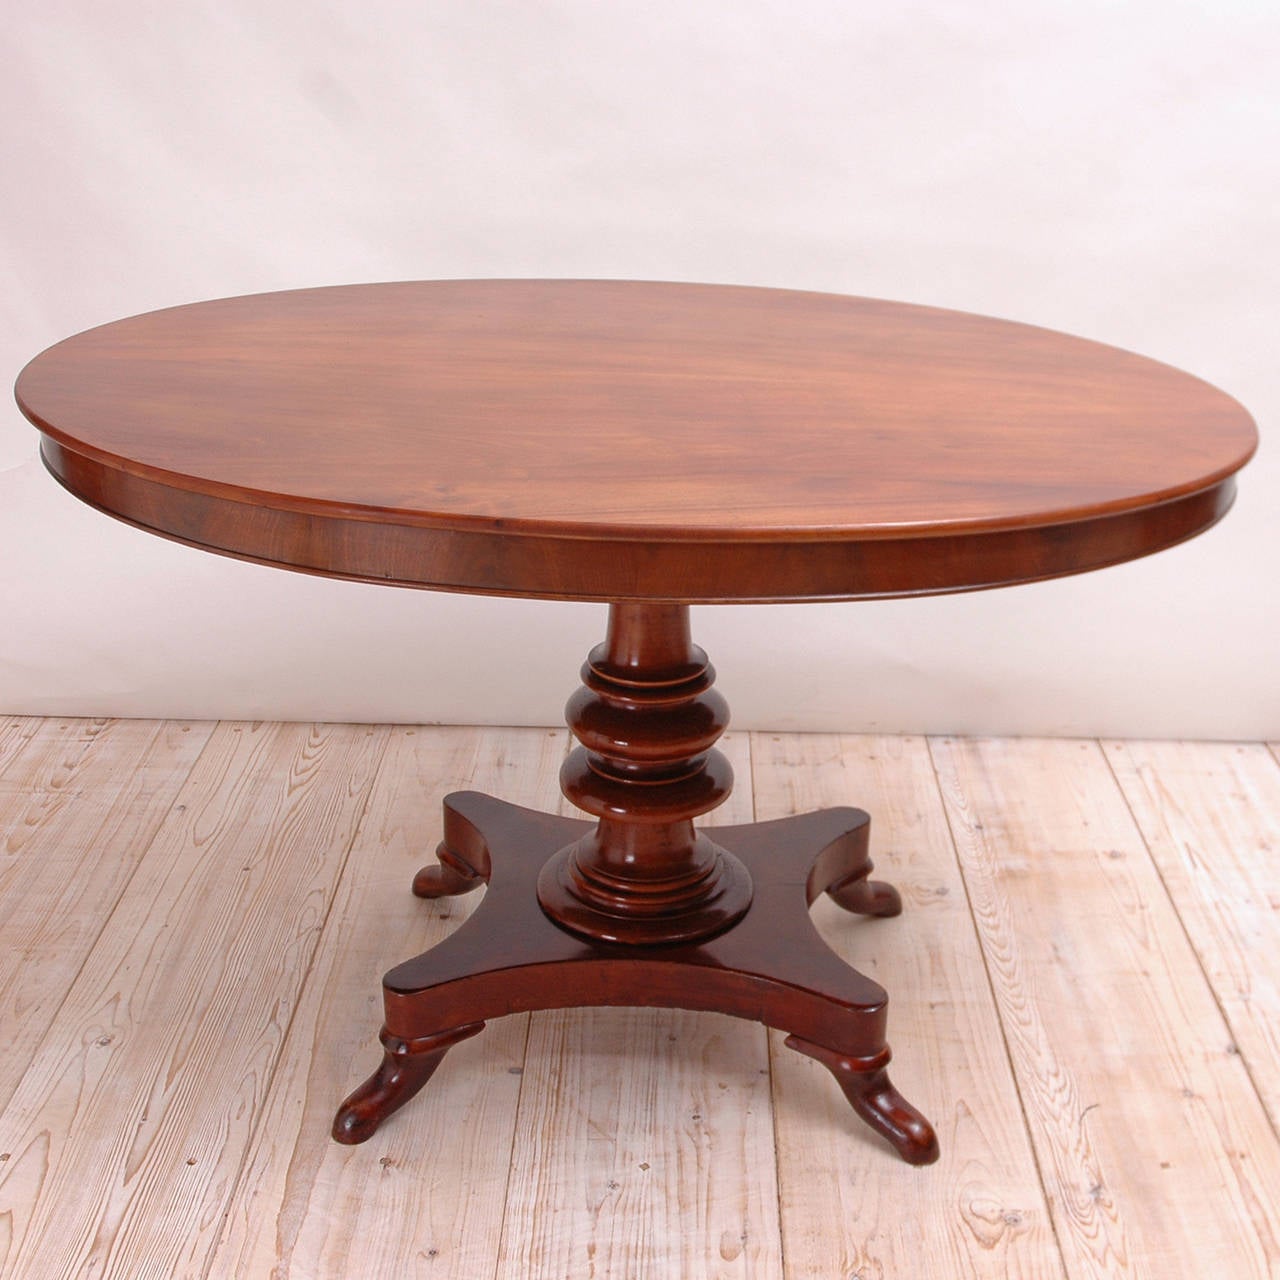 Louis Philippe Oval Center Table in Mahogany with Turned Pedestal, Denmark, c 1840